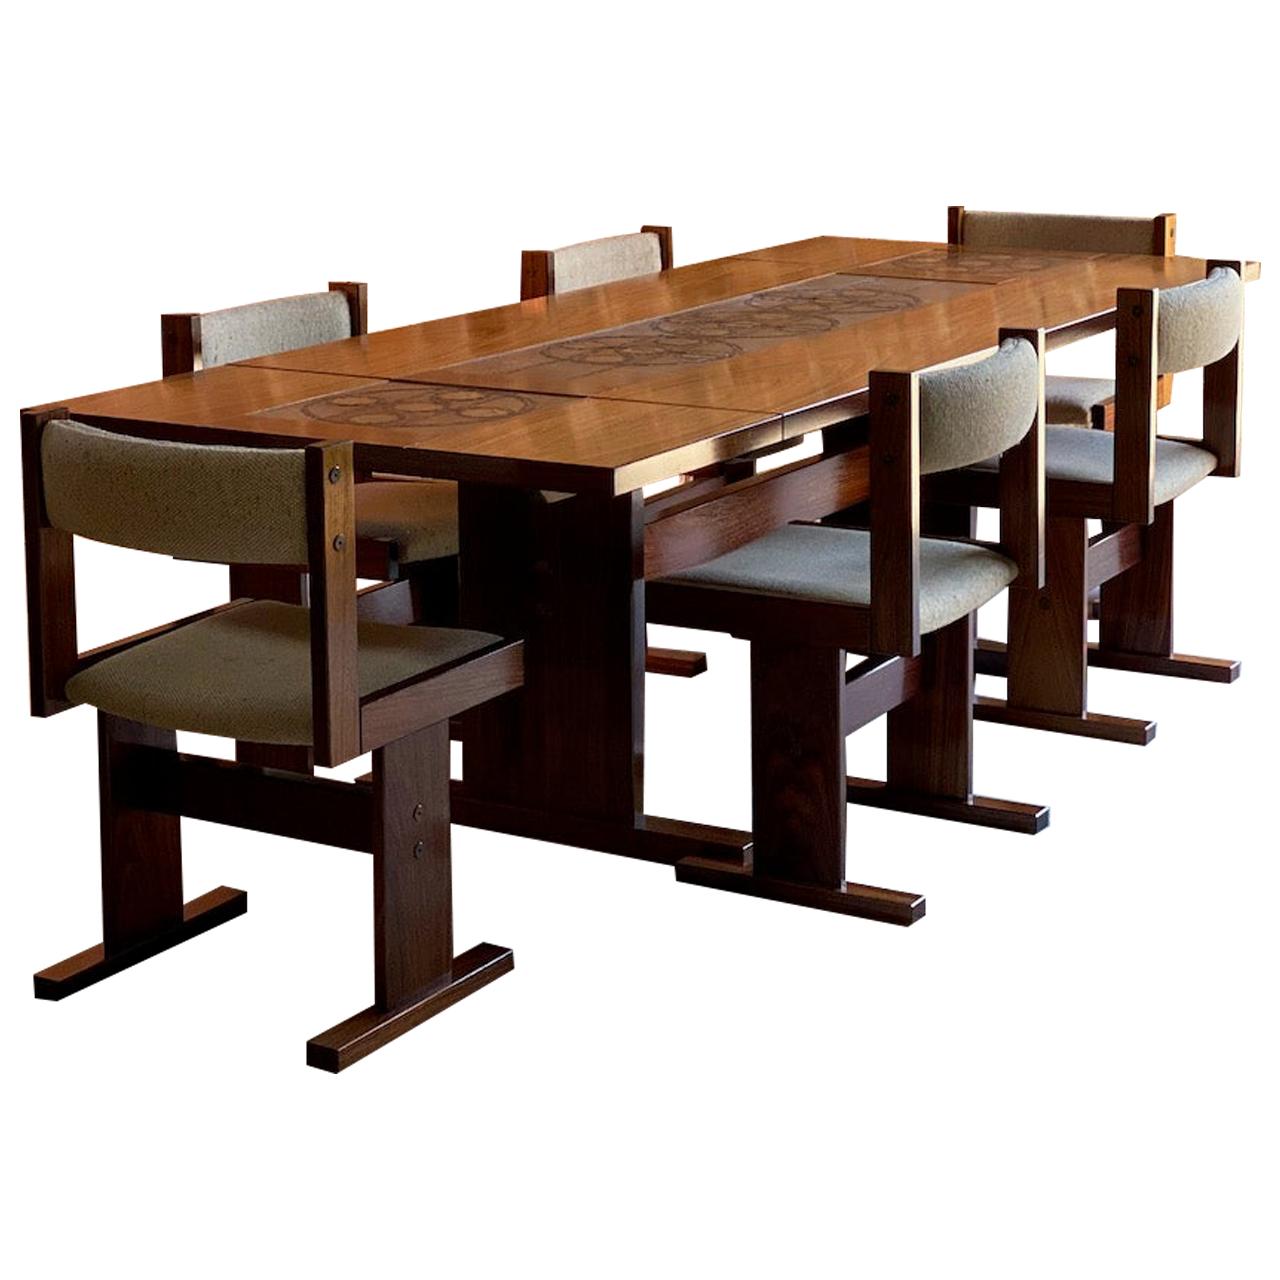 Gangso Mobler Rosewood Dining Table and Six Chairs Poul H. Poulsen Denmark For Sale